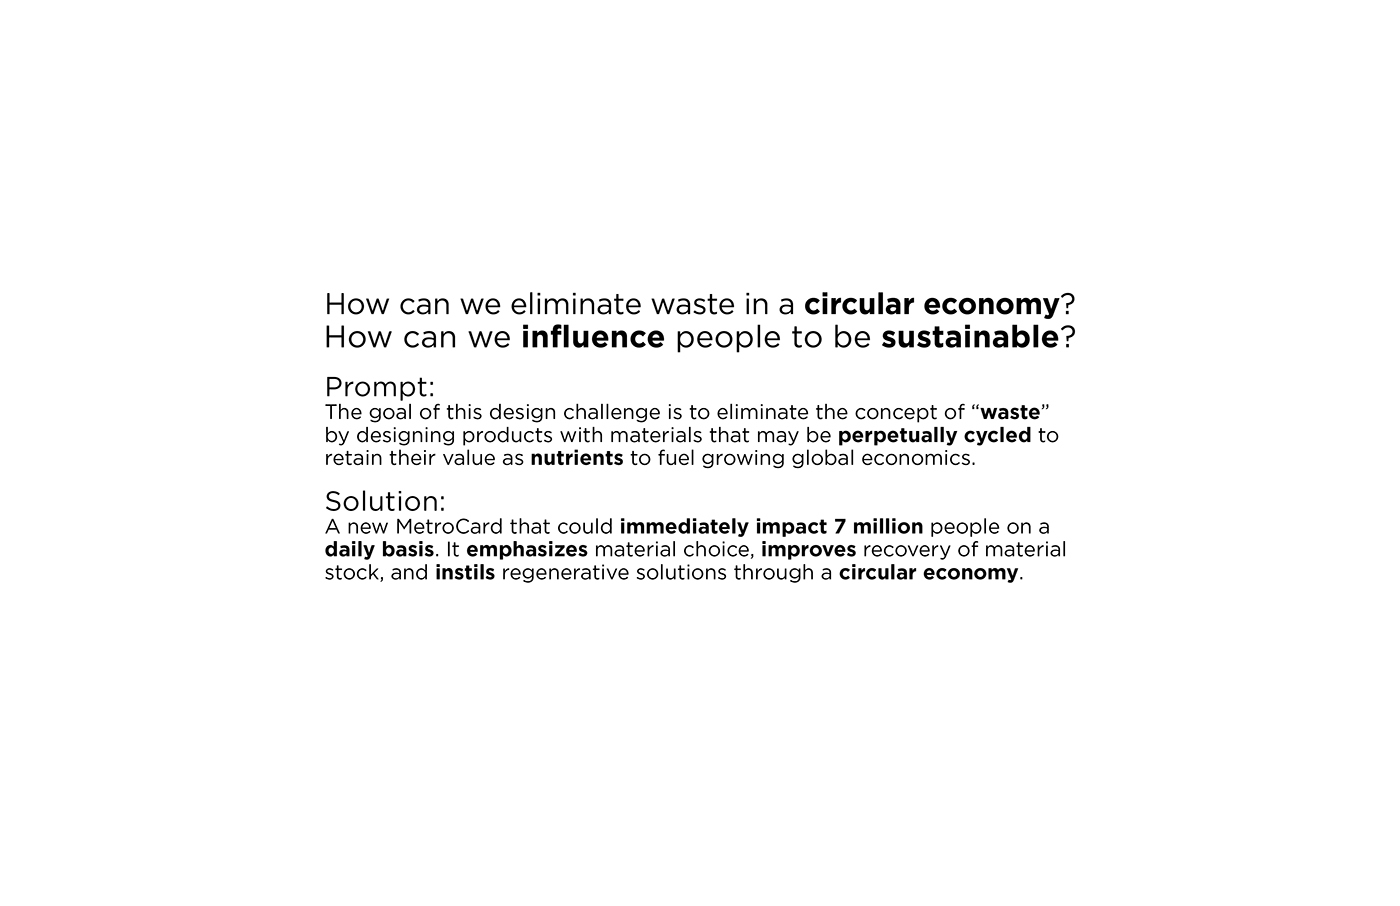 Cradle to Cradle C2C Sustainability Sustainable circular economy waste nutrients influence impact MTA MetroCard Contactless Contactless Card card bioplastic